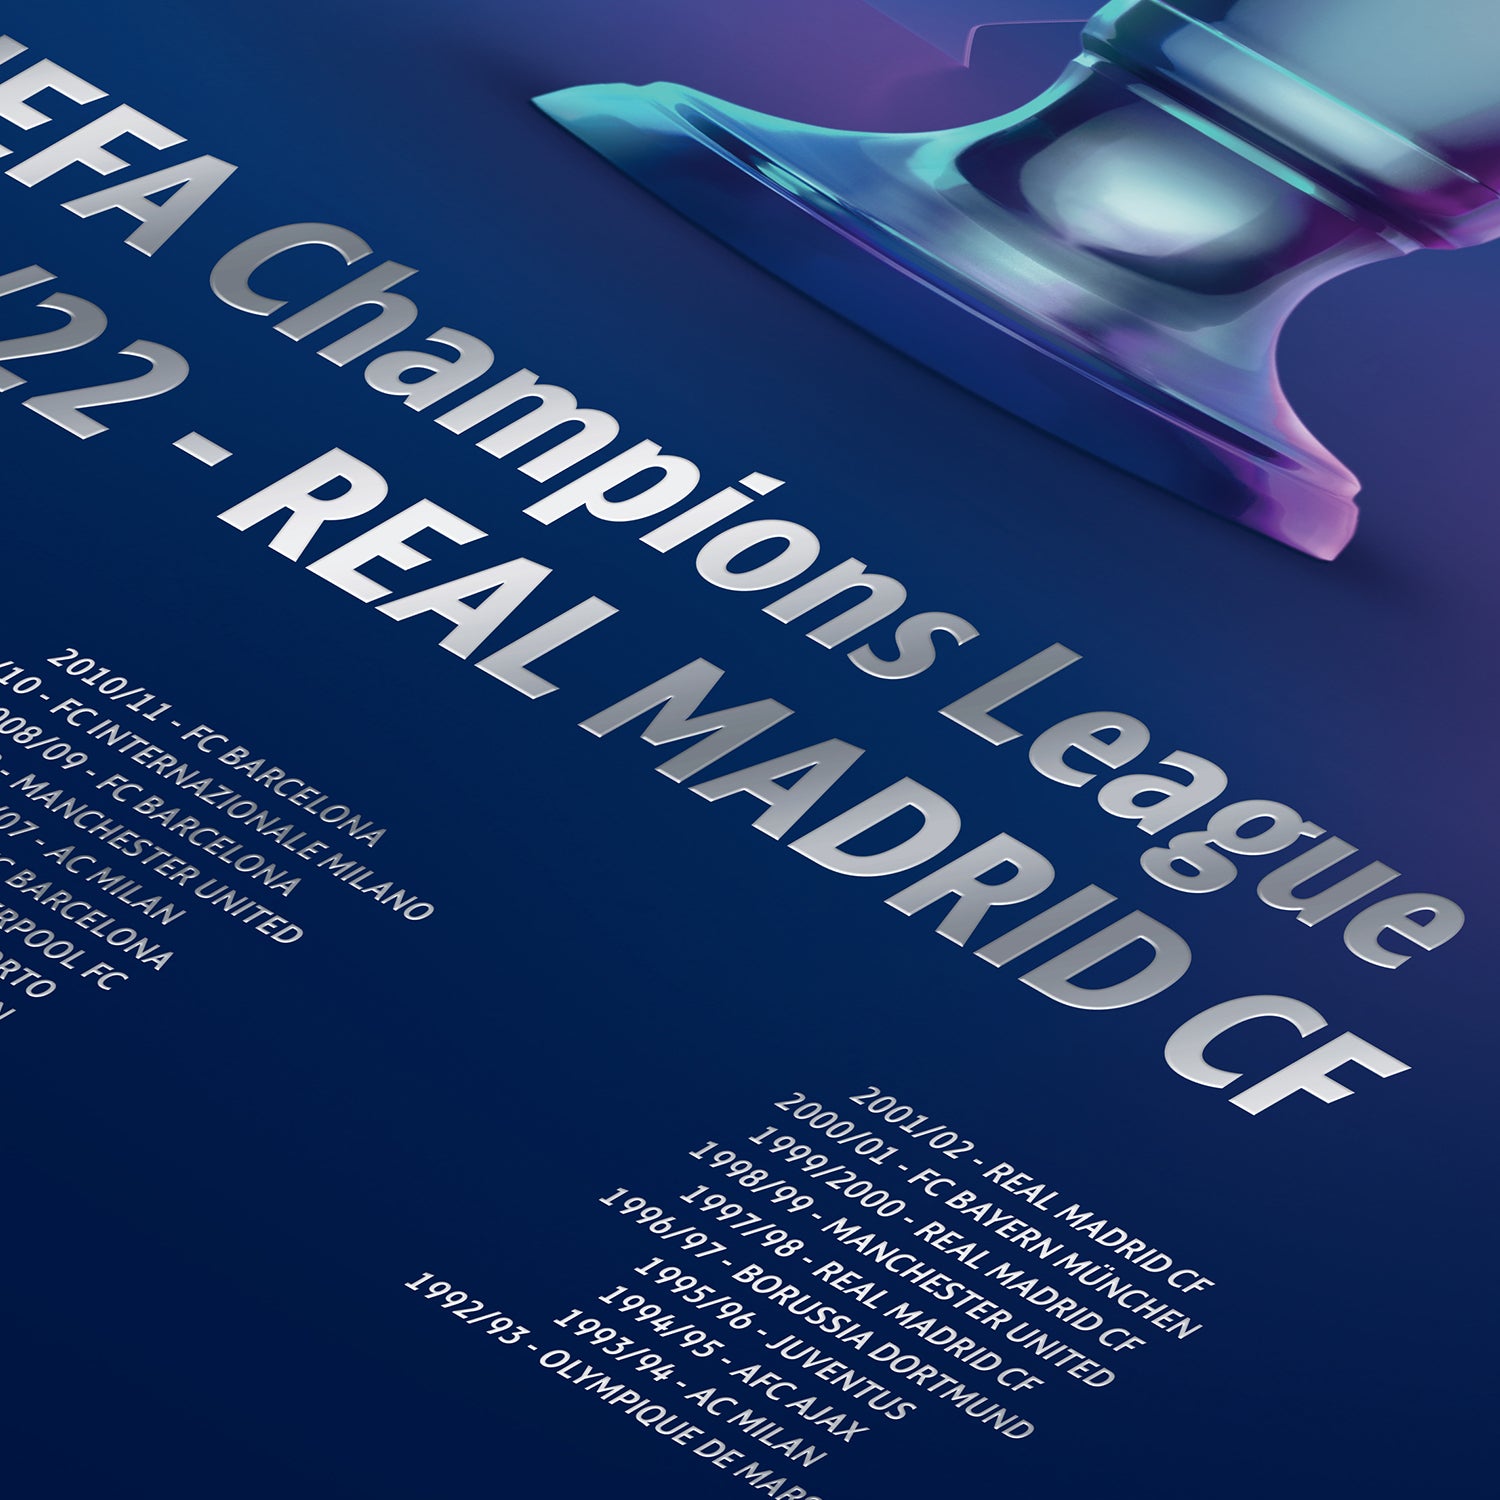 Real Madrid Champions League winner poster